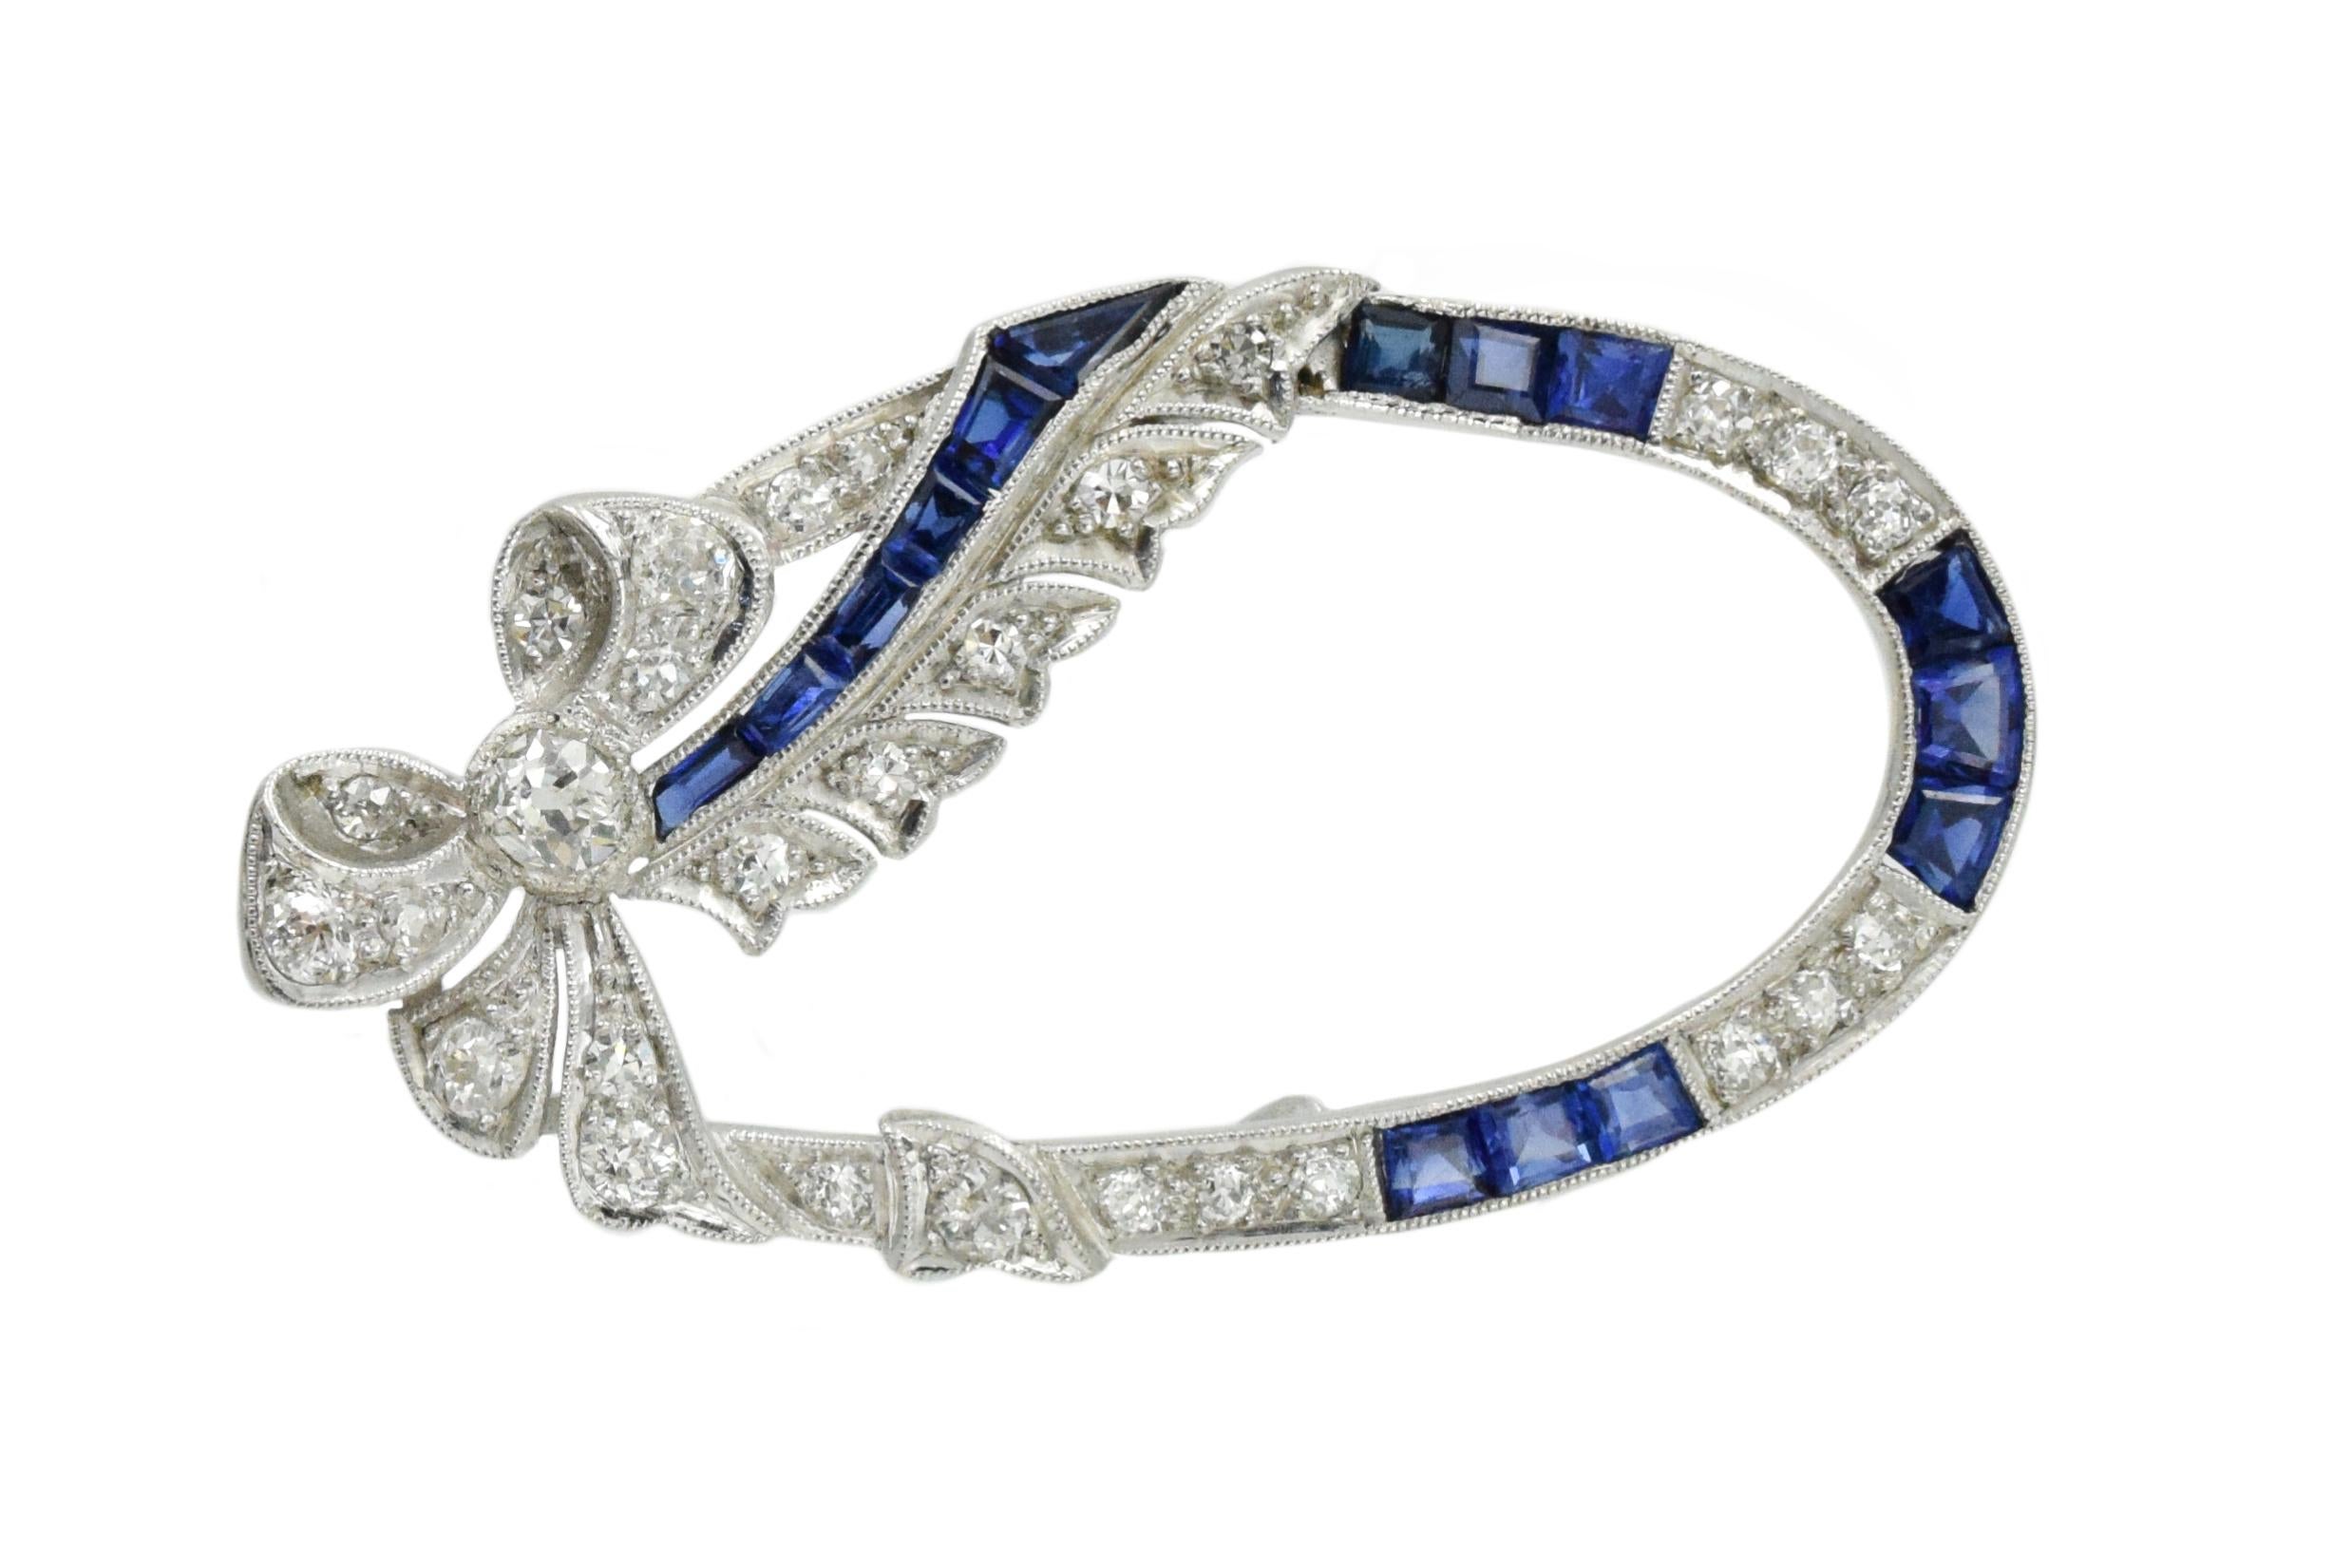 Art Deco brooch with millegrain accents. The brooch has 27 round-cut diamonds with an approximate total weight of 1.25 carats, and 15 calibre-cut sapphires with an approximate total weight of 1.50 carats. The brooch is oval shape with a diamond set